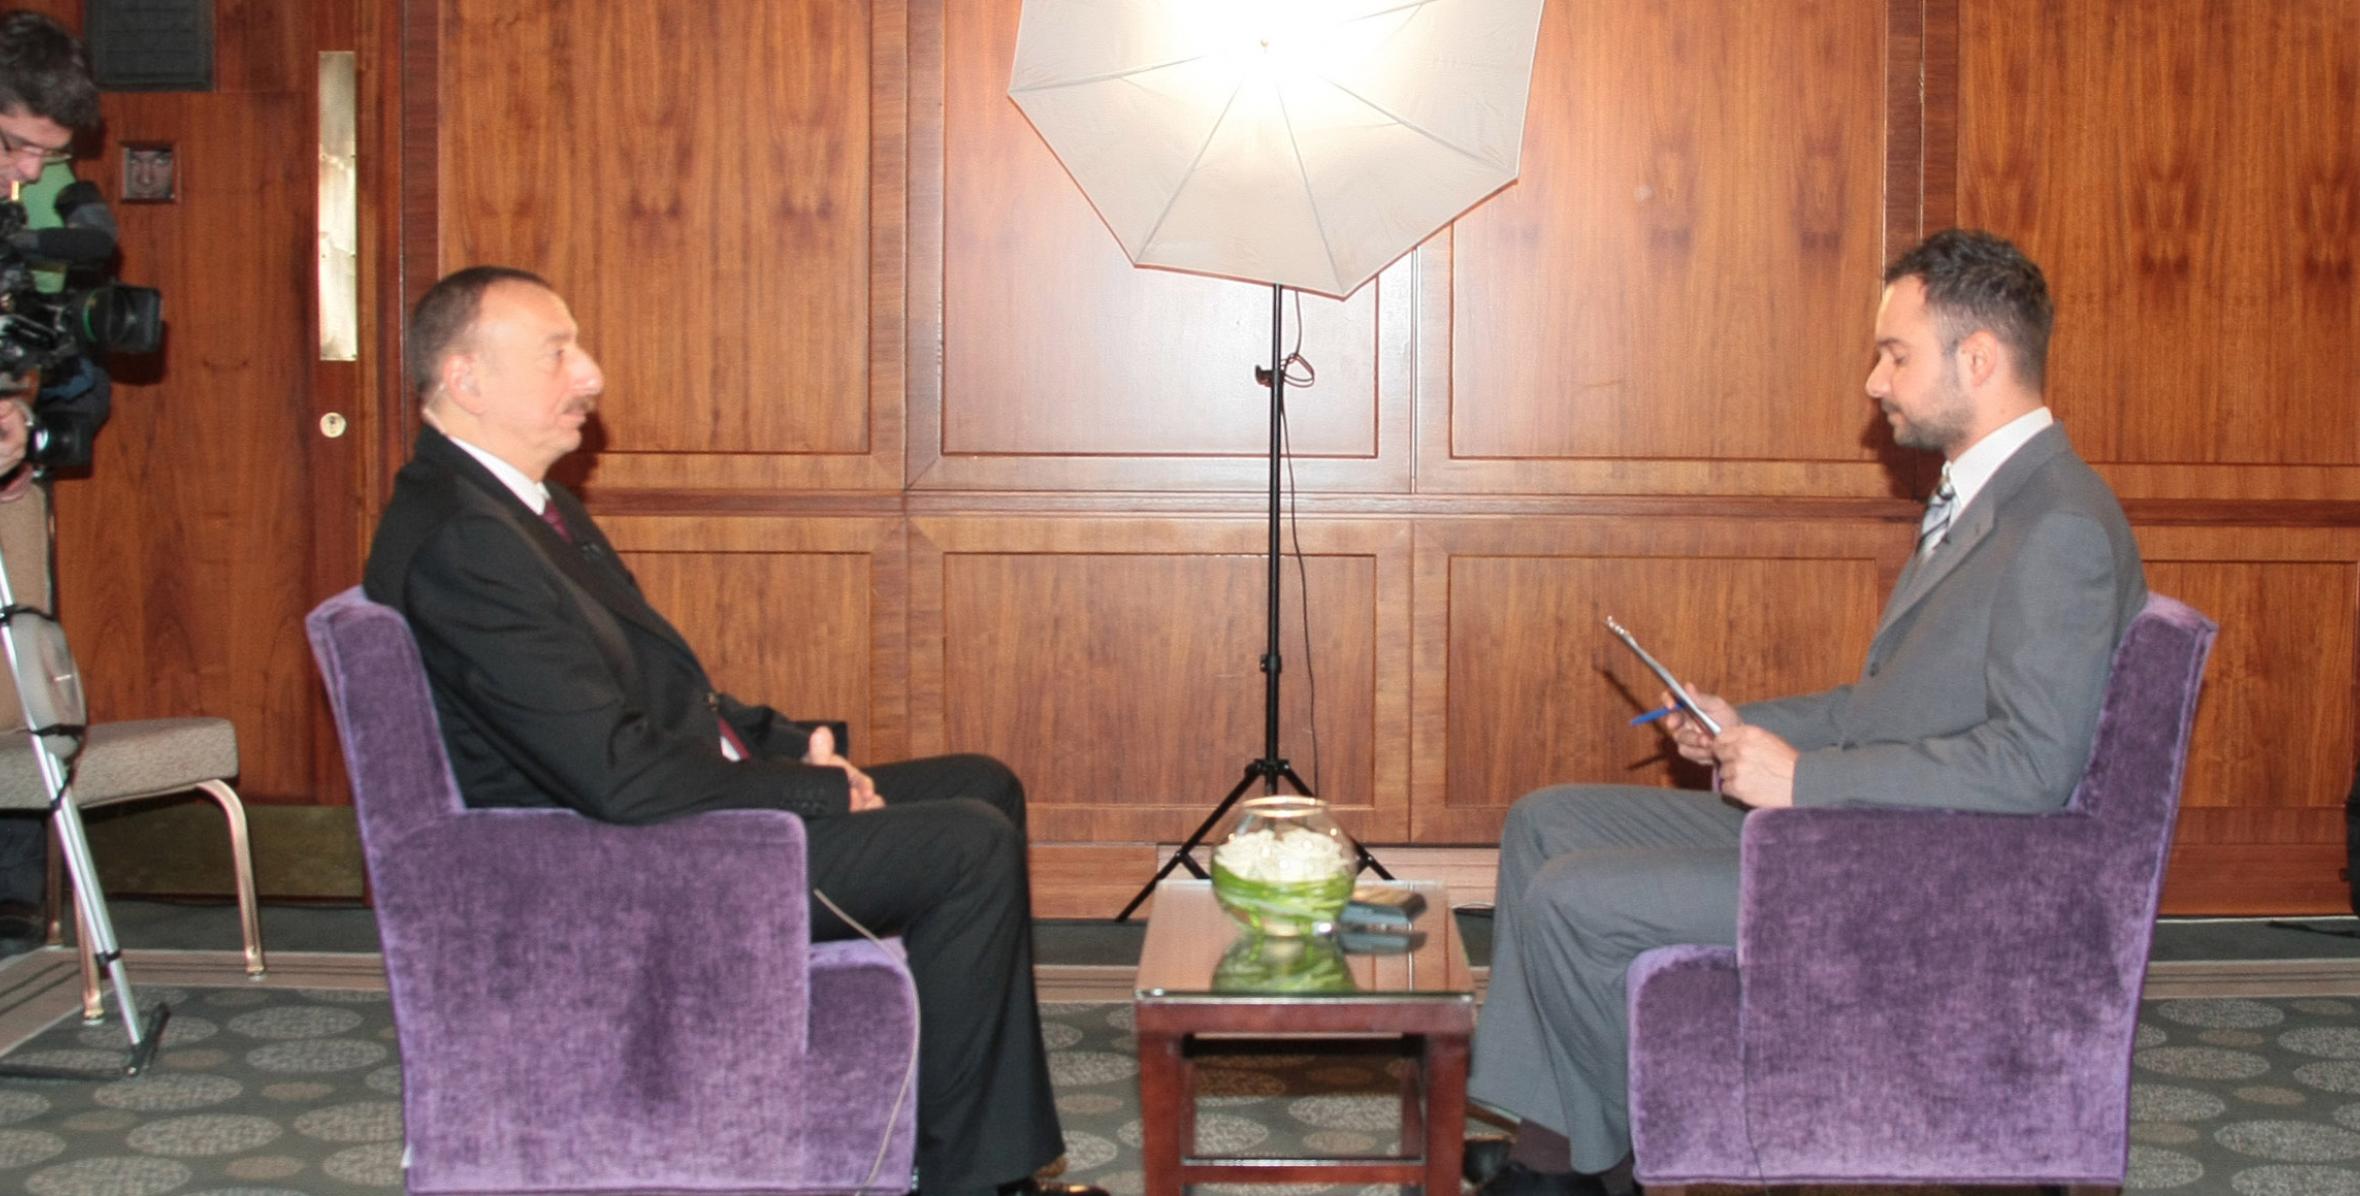 Ilham Aliyev was interviewed by the Hungarian National Television